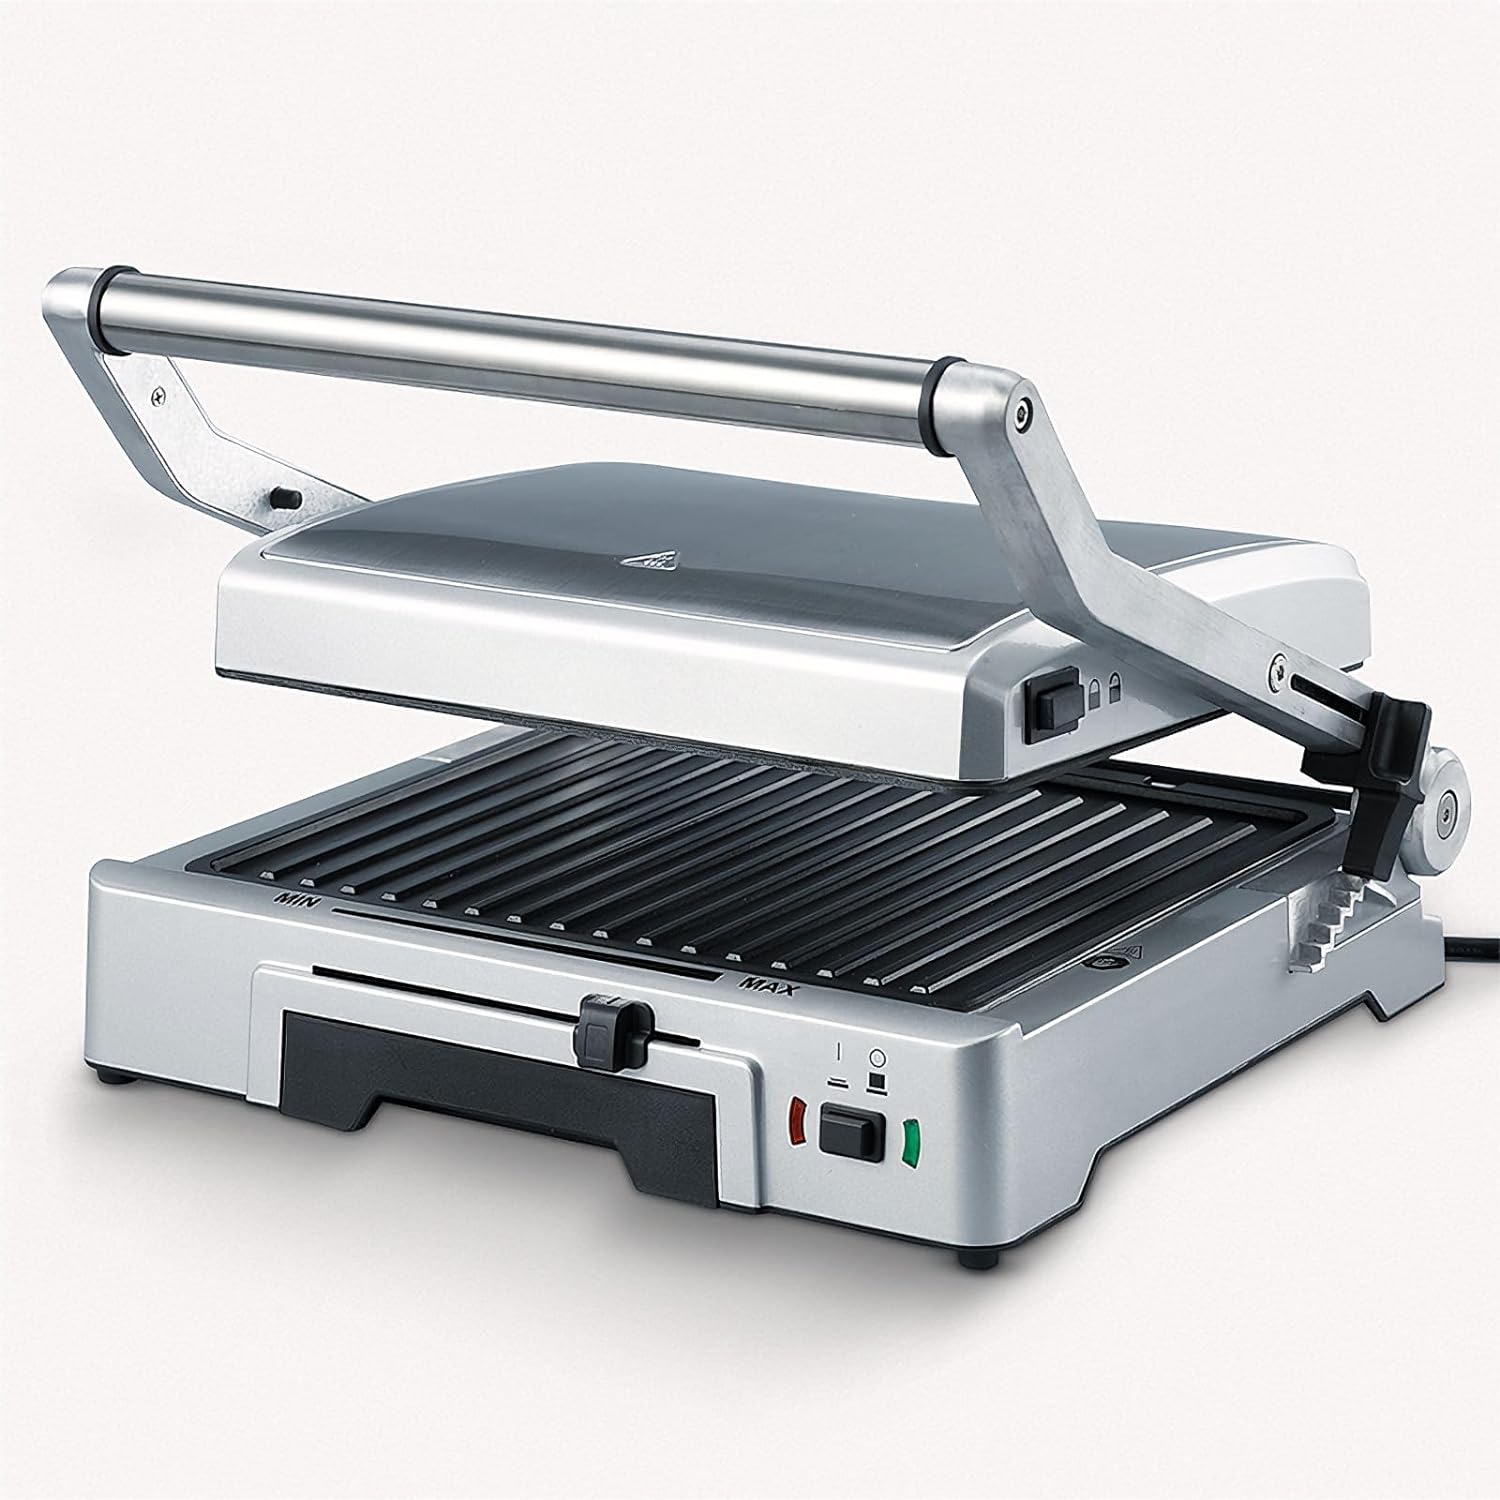 Severin Automatic Grill, Approx. 1800 W /Silver 2 exchangeable